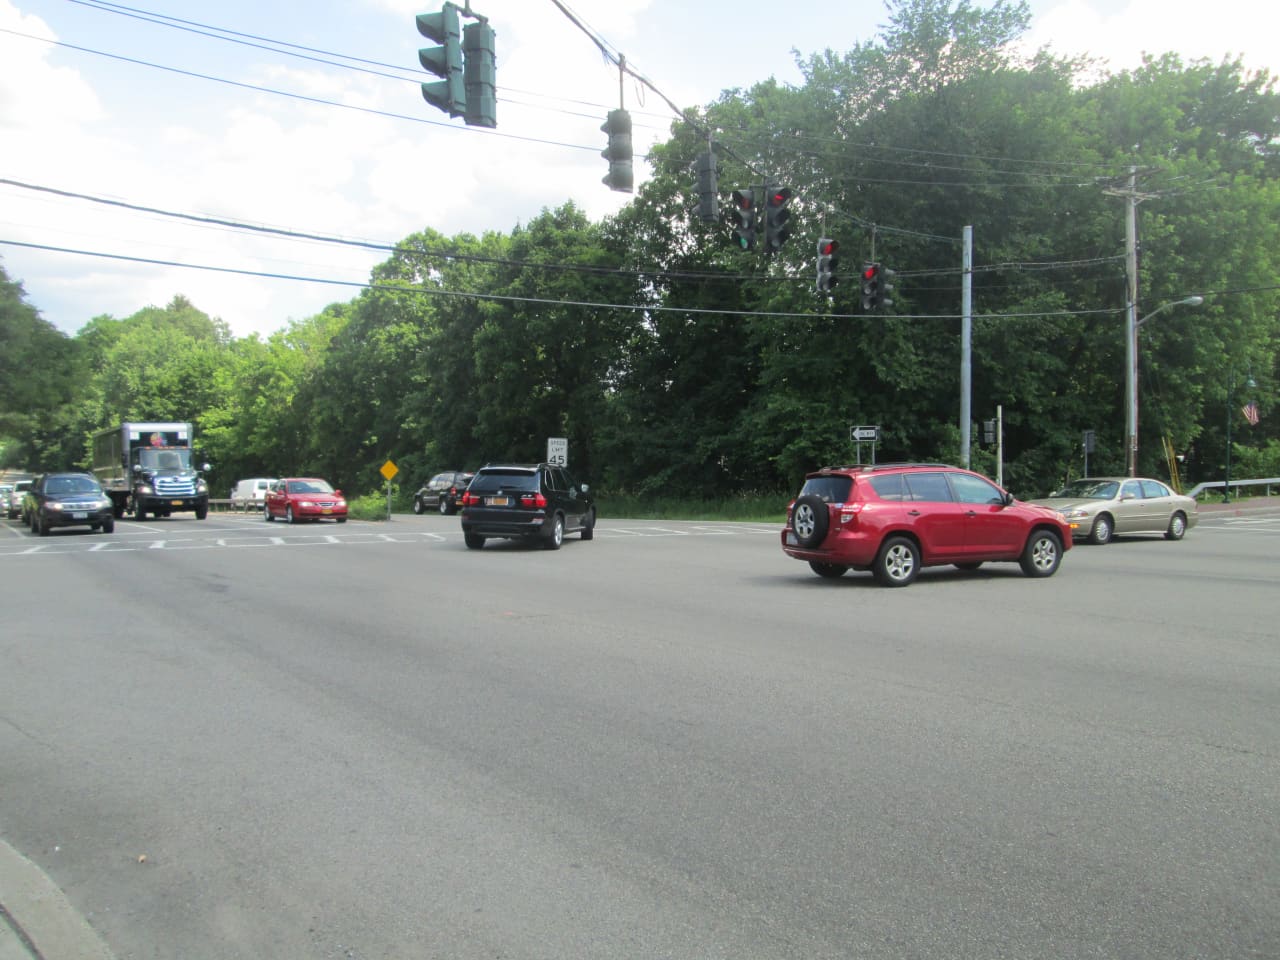 The intersection at North State Road and Route 9A in Briarcliff Manor is considered especially treacherous.